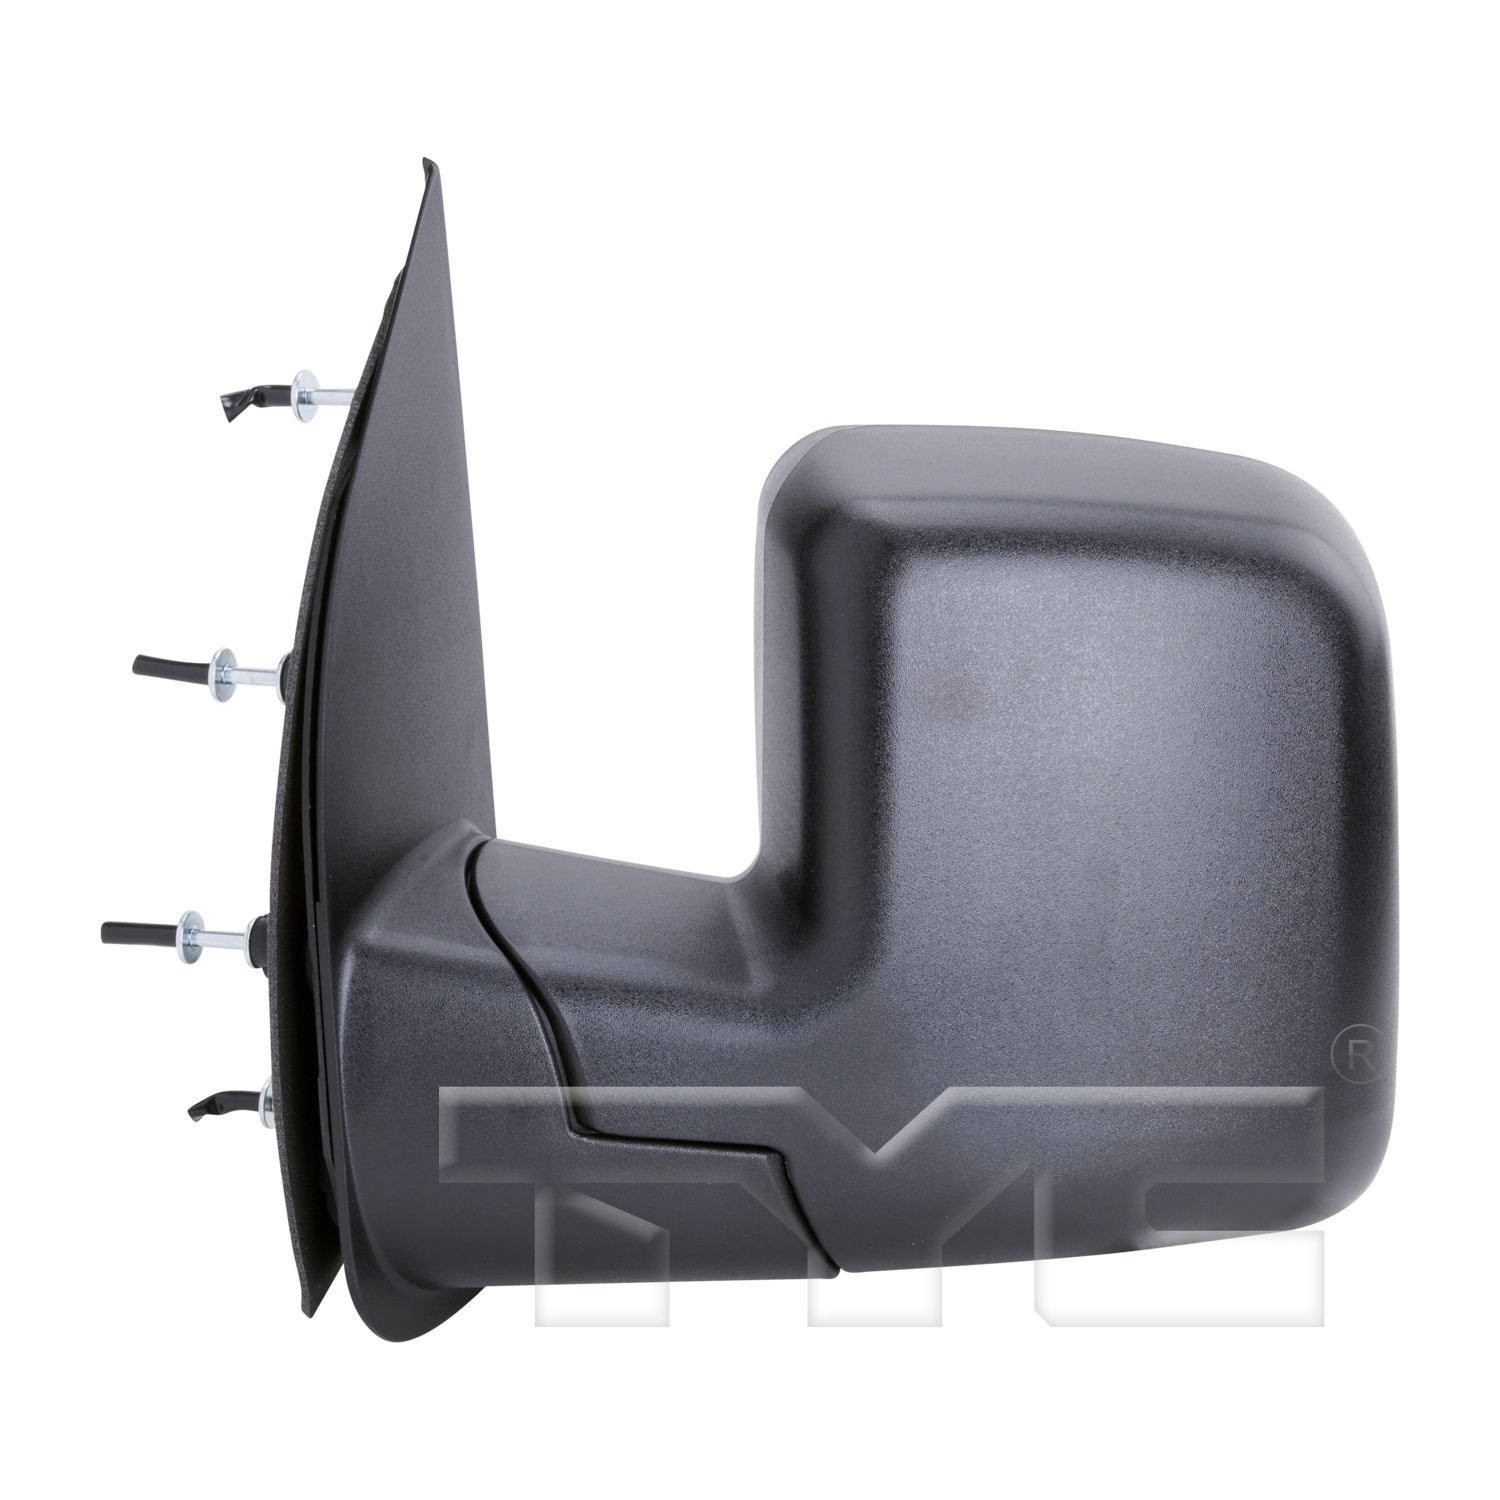 Aftermarket MIRRORS for FORD - E-450 SUPER DUTY, E-450 SUPER DUTY,03-07,LT Mirror outside rear view